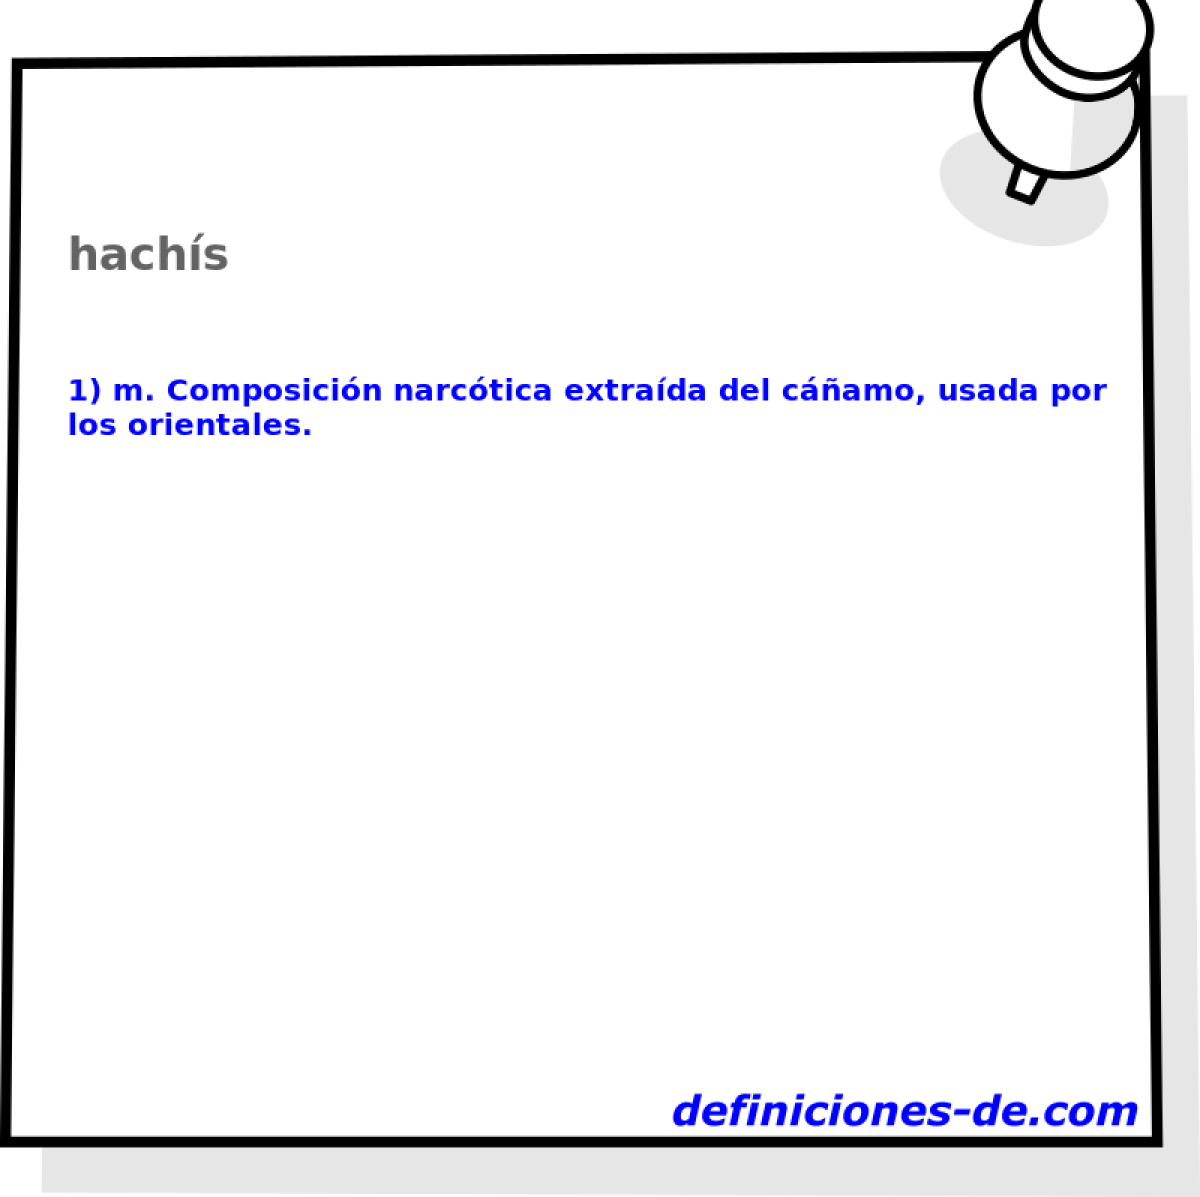 hachs 